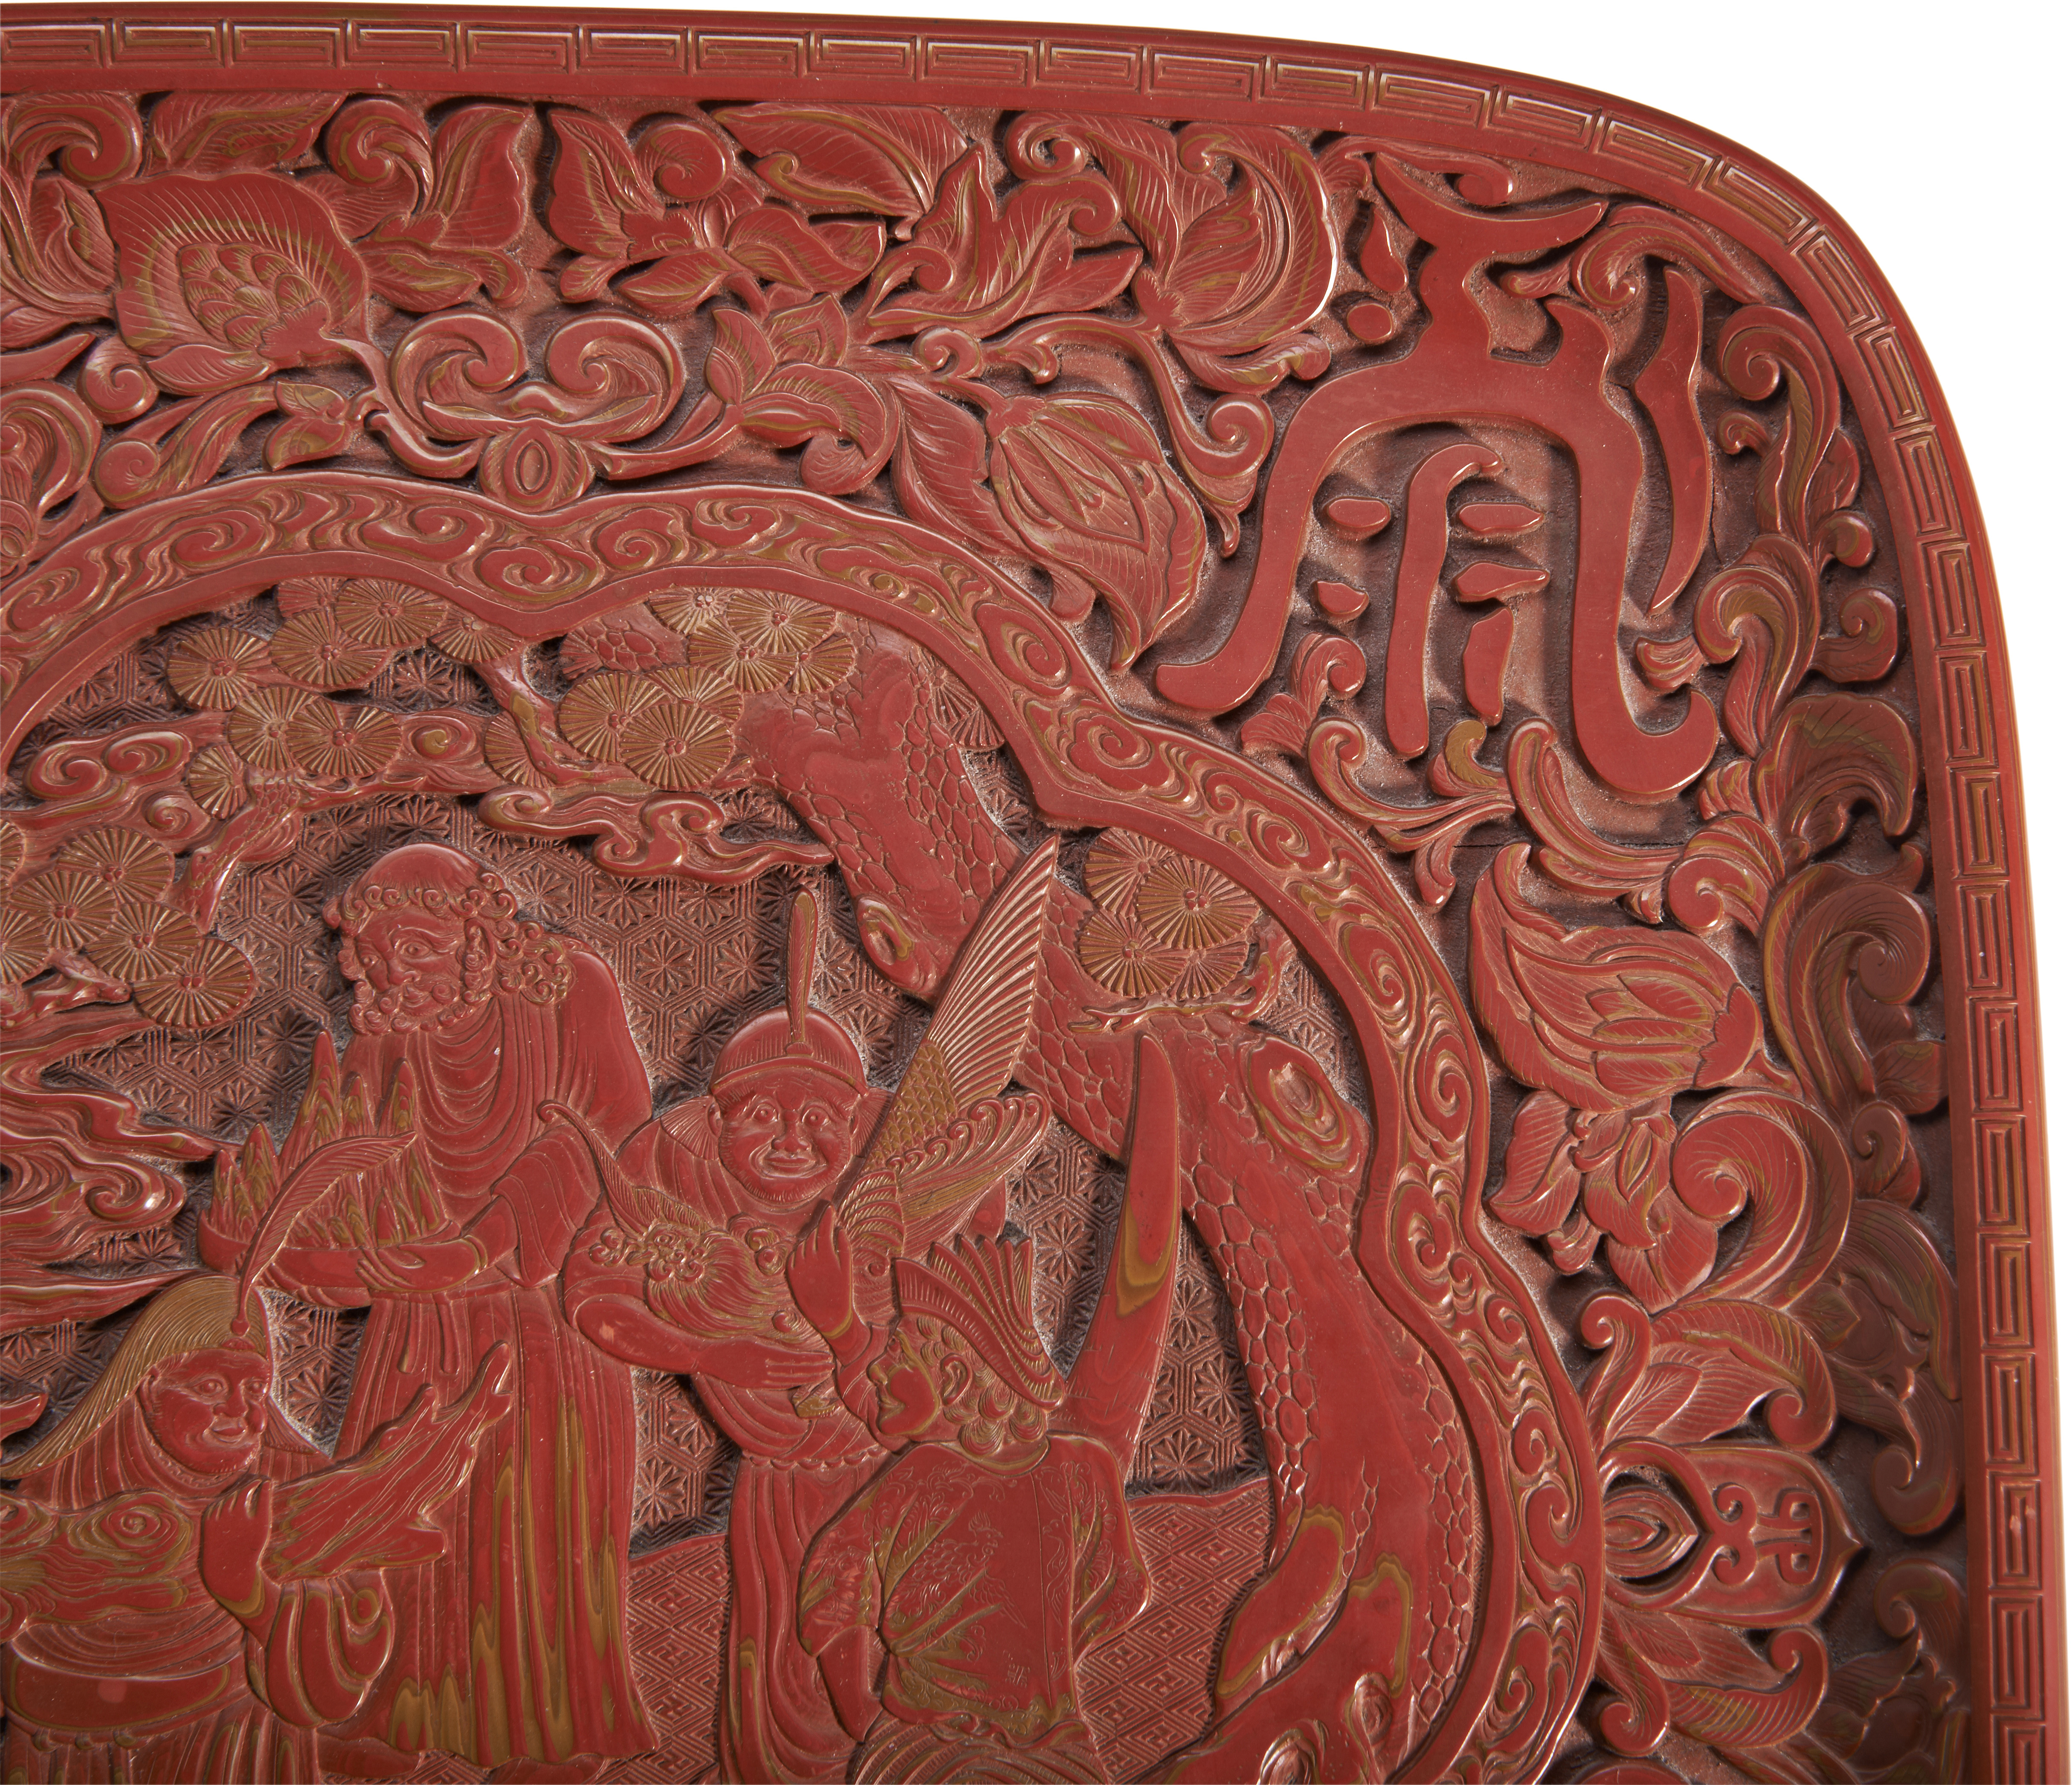 A FINE CINNABAR LACQUER DISH QIANLONG PERIOD (1736-1795) 清 剔红方形漆盘 red square carved - Image 3 of 6